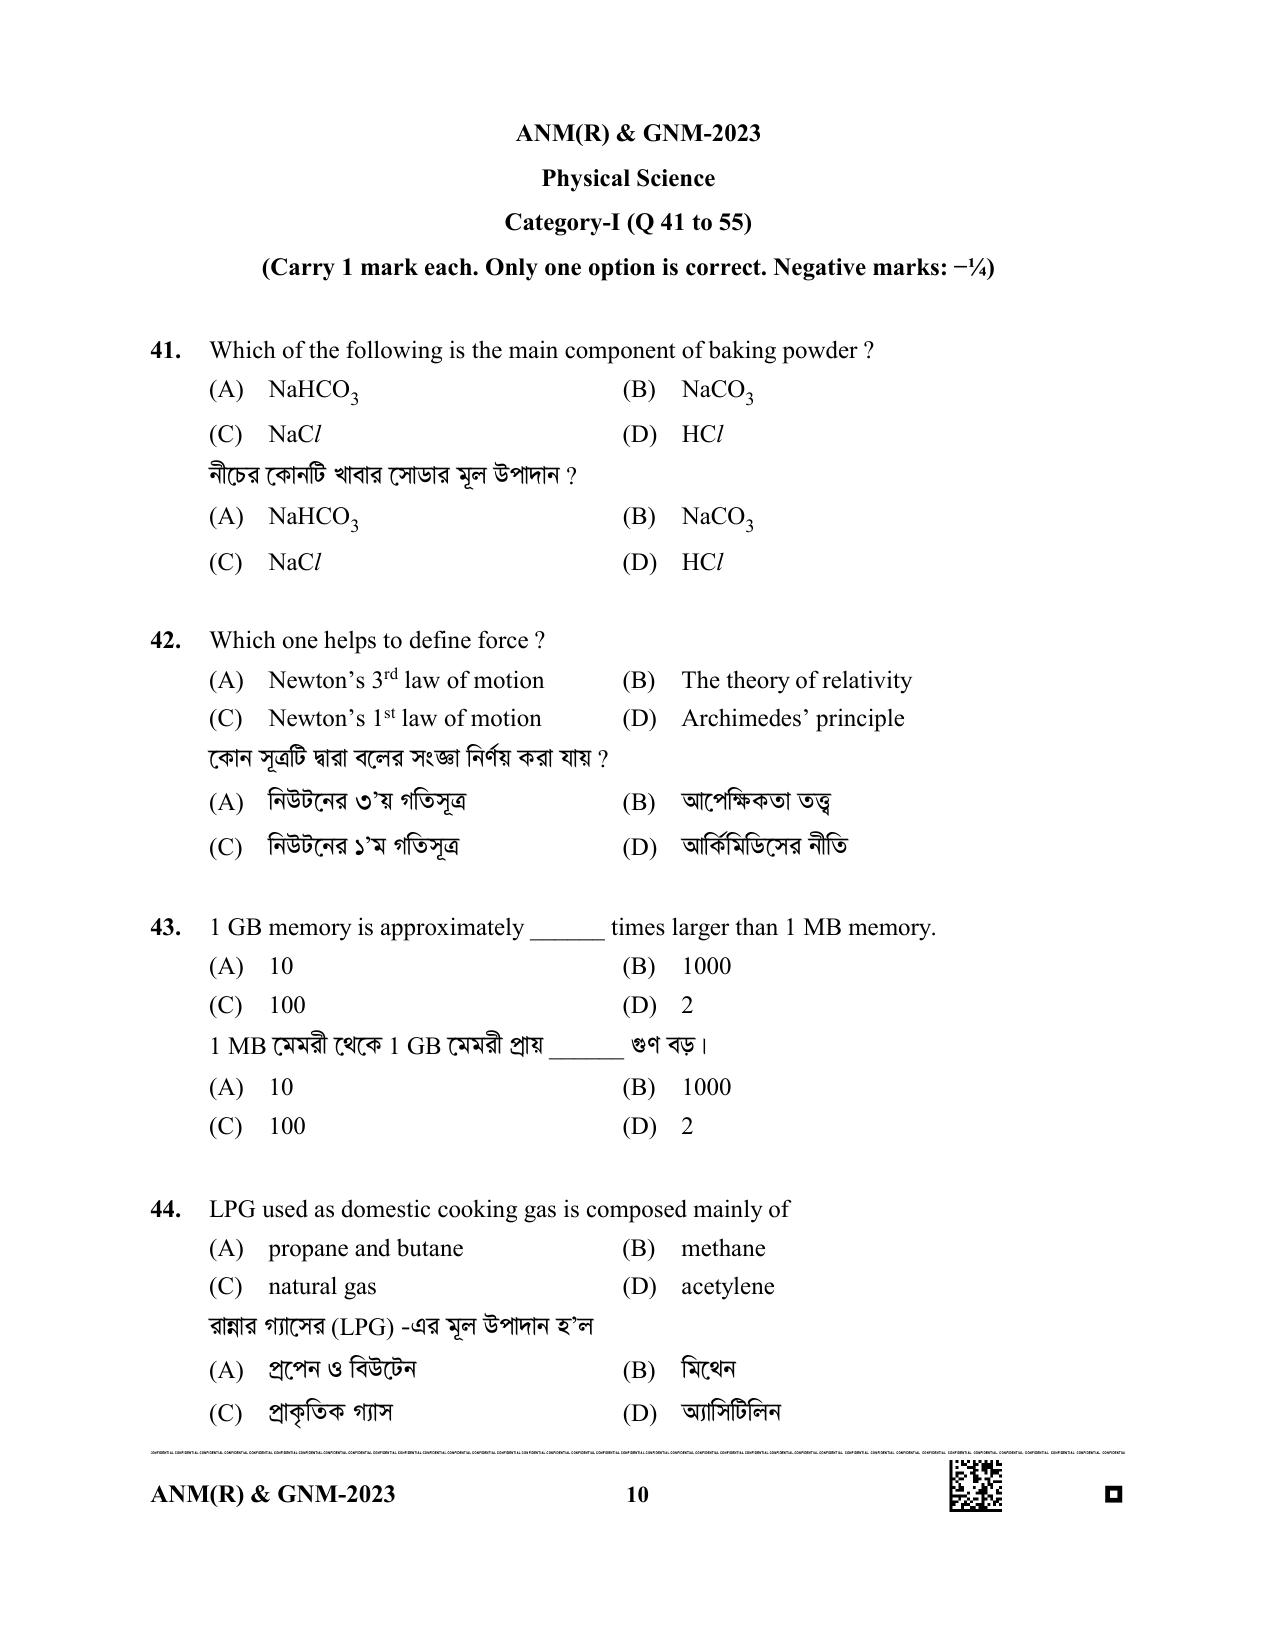 WB ANM GNM 2023 Question Paper - Page 10